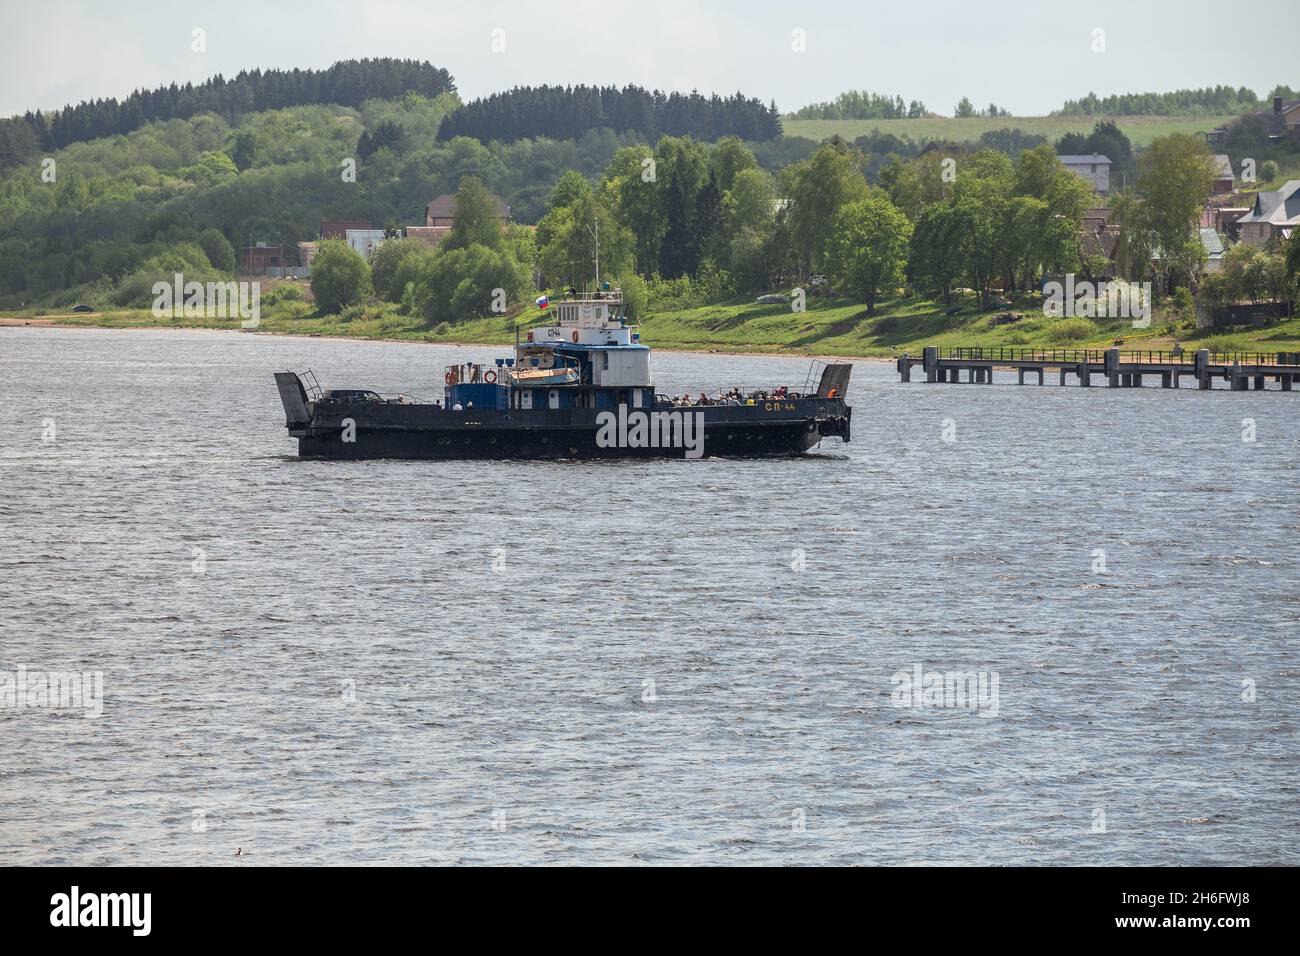 Tutaev, Yaroslavl region, Russia - May 15, 2019: Ferry crossing the Volga river. Car ferry SP44 transports cars and passengers from one bank of the Vo Stock Photo